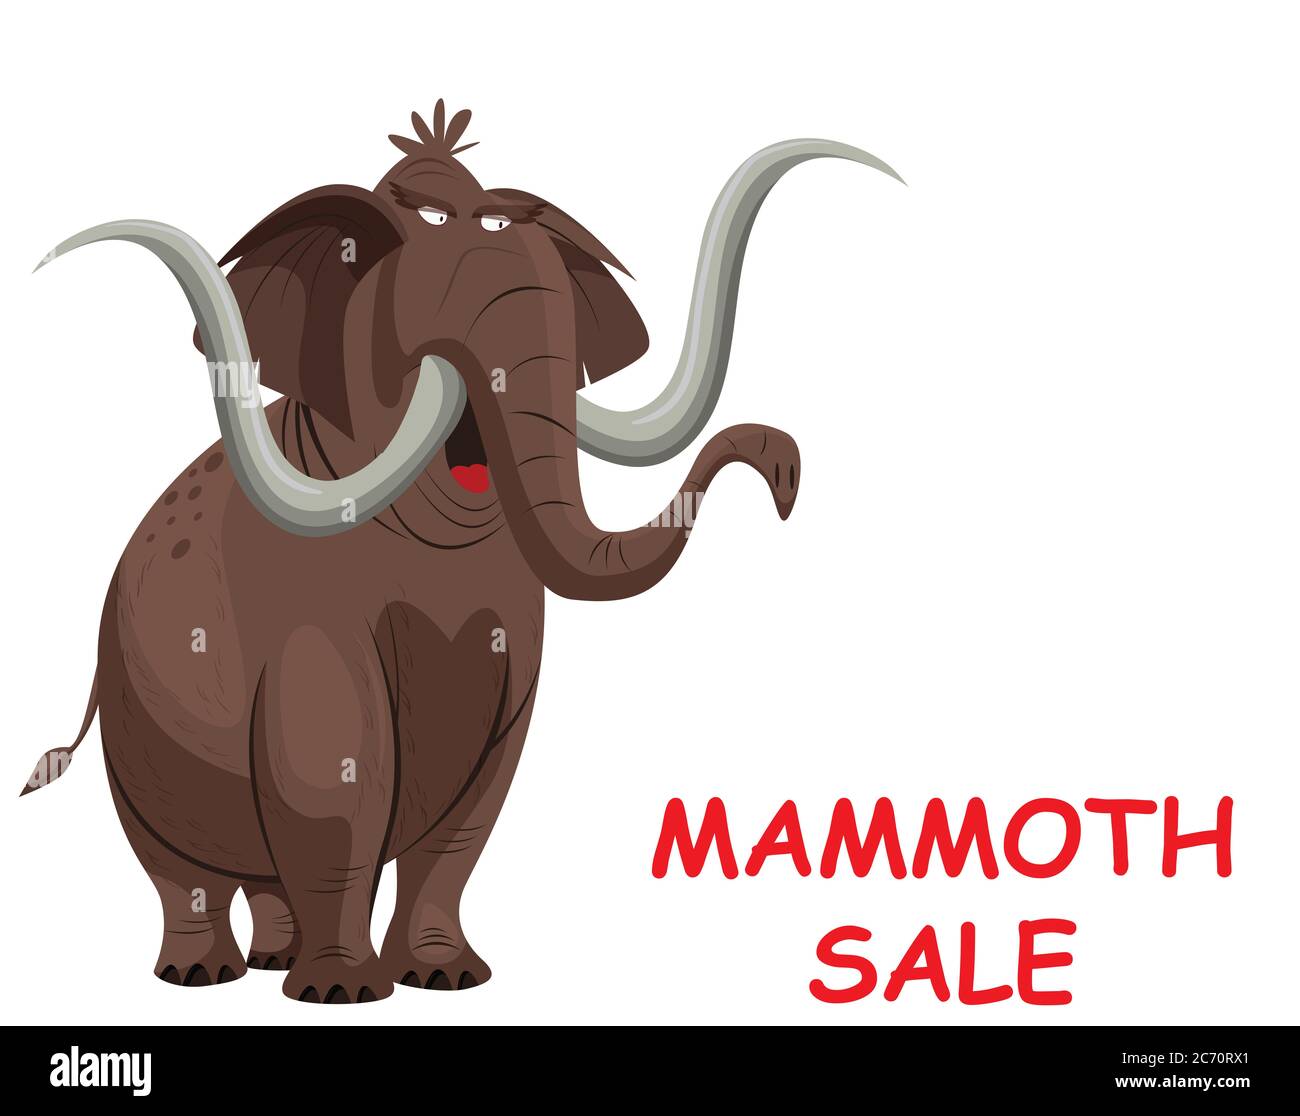 Comical Mammoth sale with copy space for own text or graphics isolated on white background Stock Photo